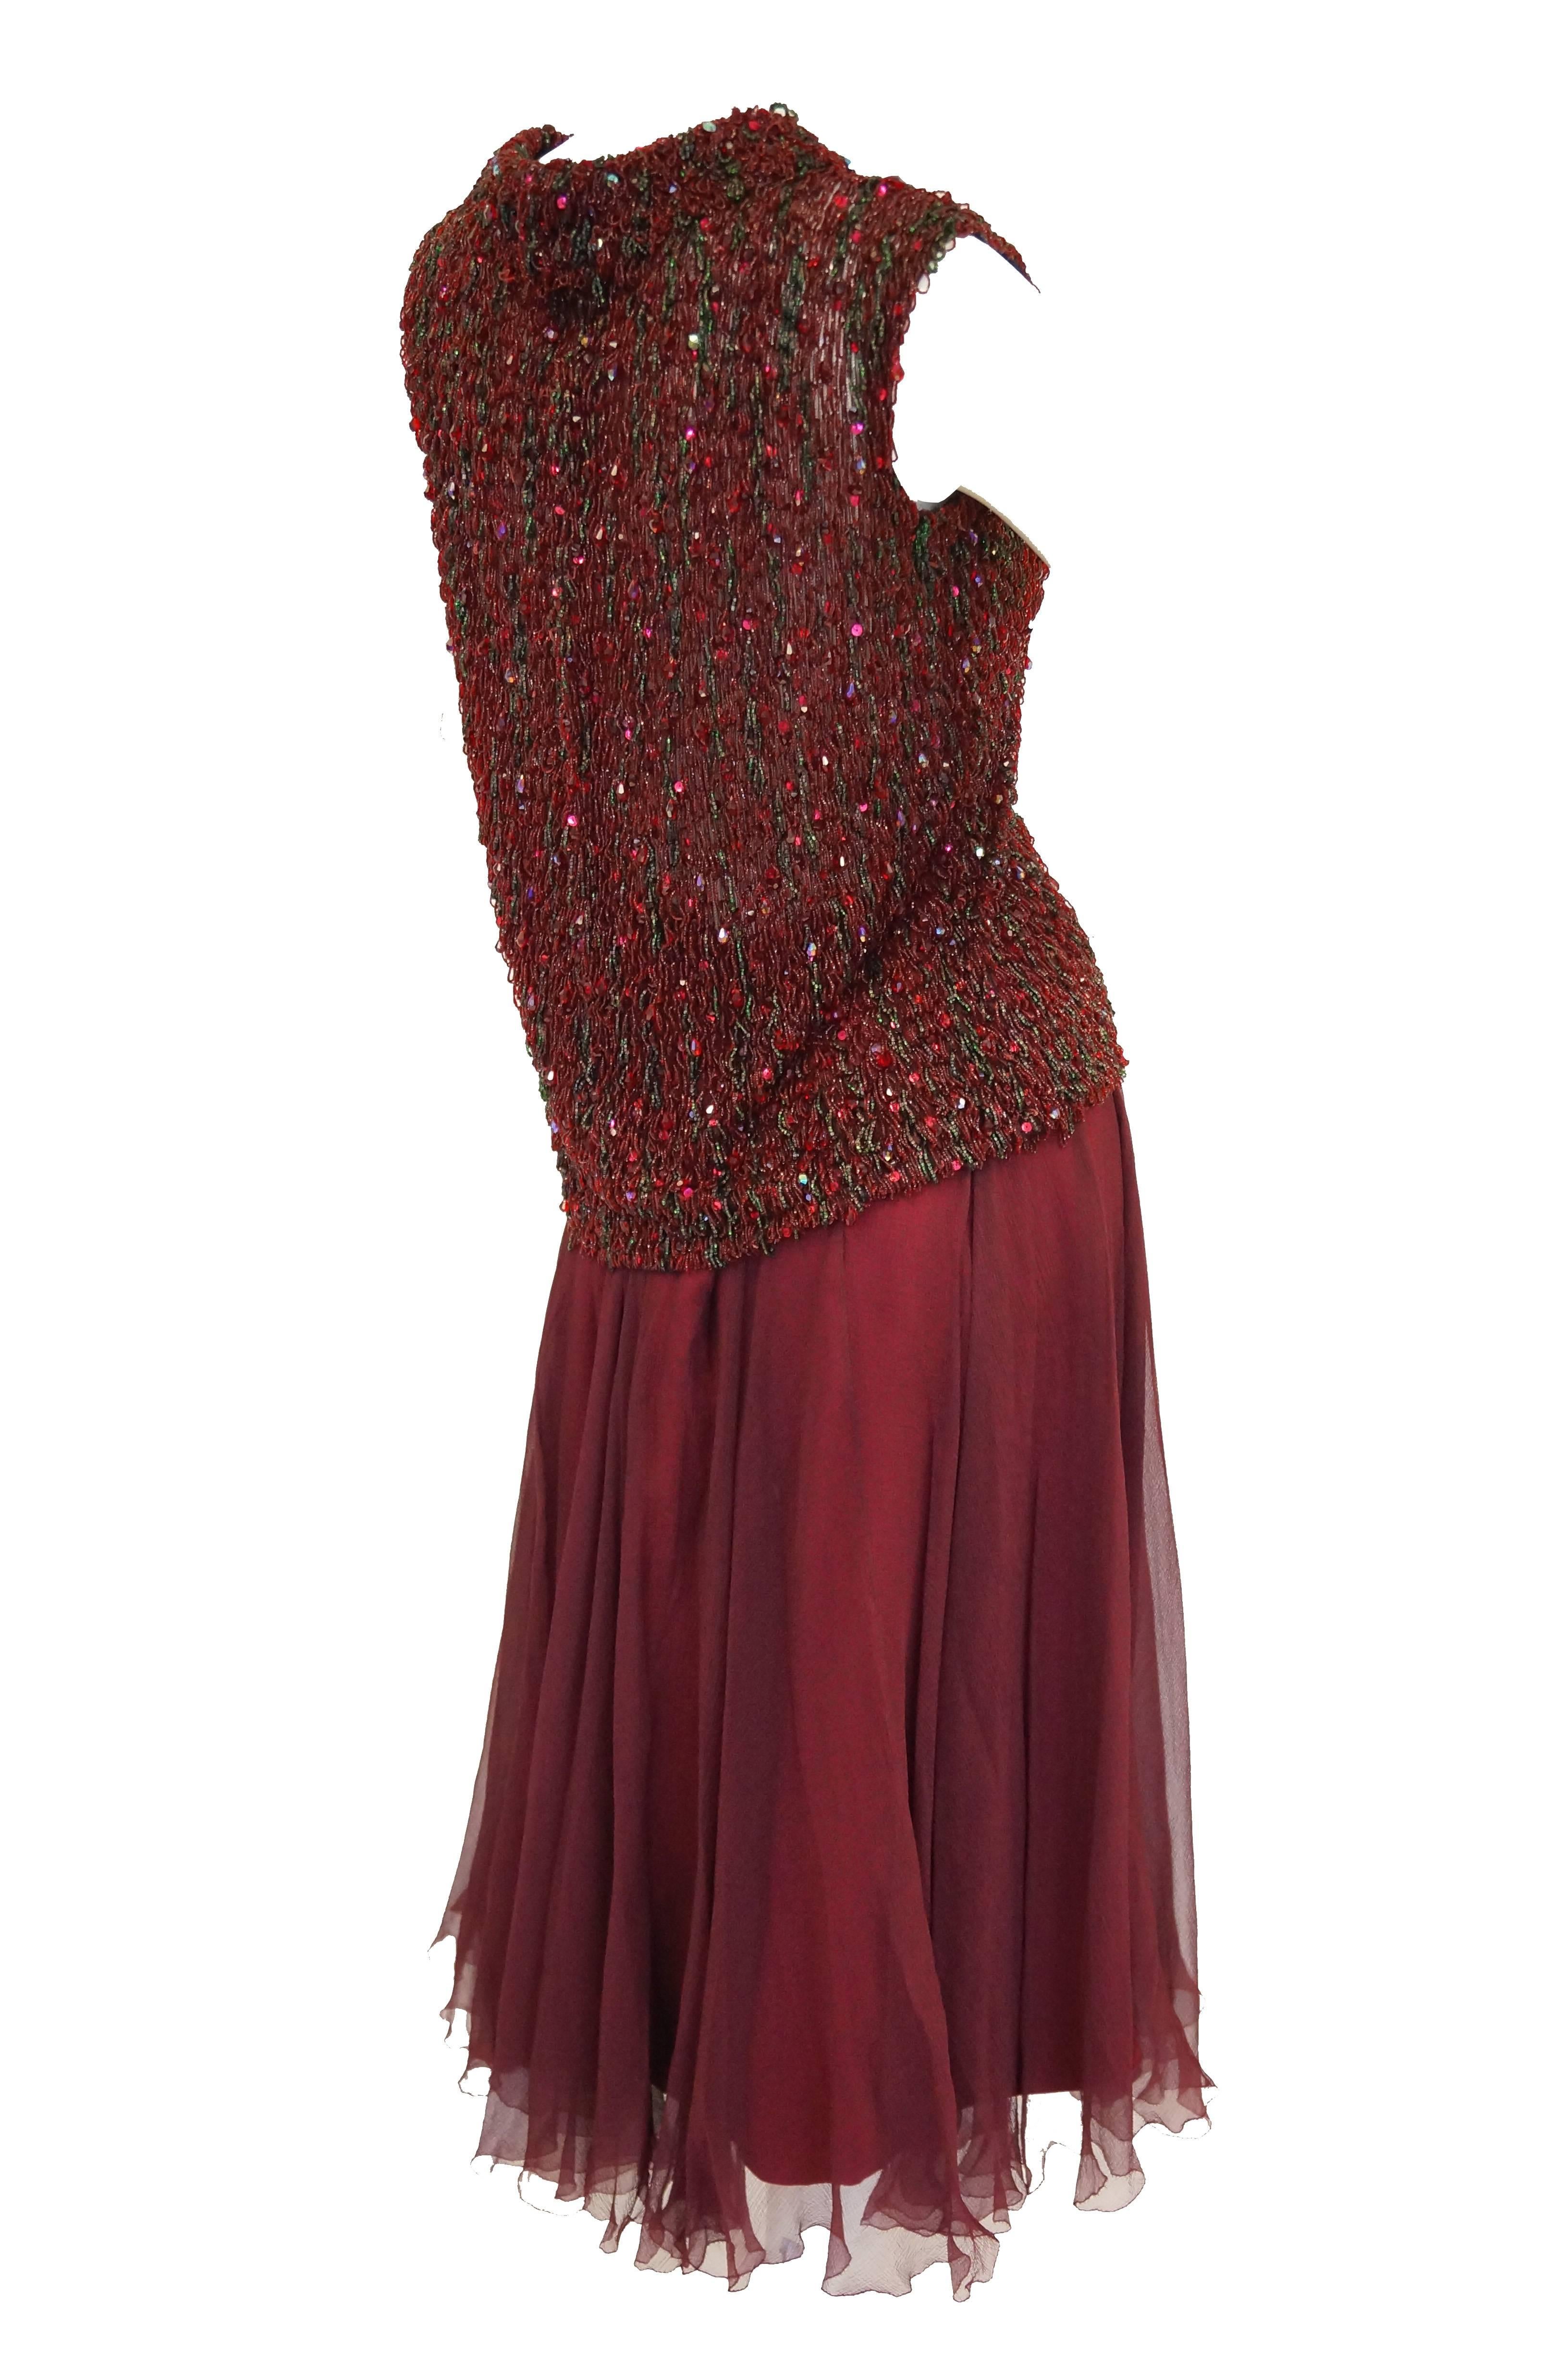 Yves Saint Laurent Couture Evening Dress Owned by Claudette Colbert, 1963  For Sale 1